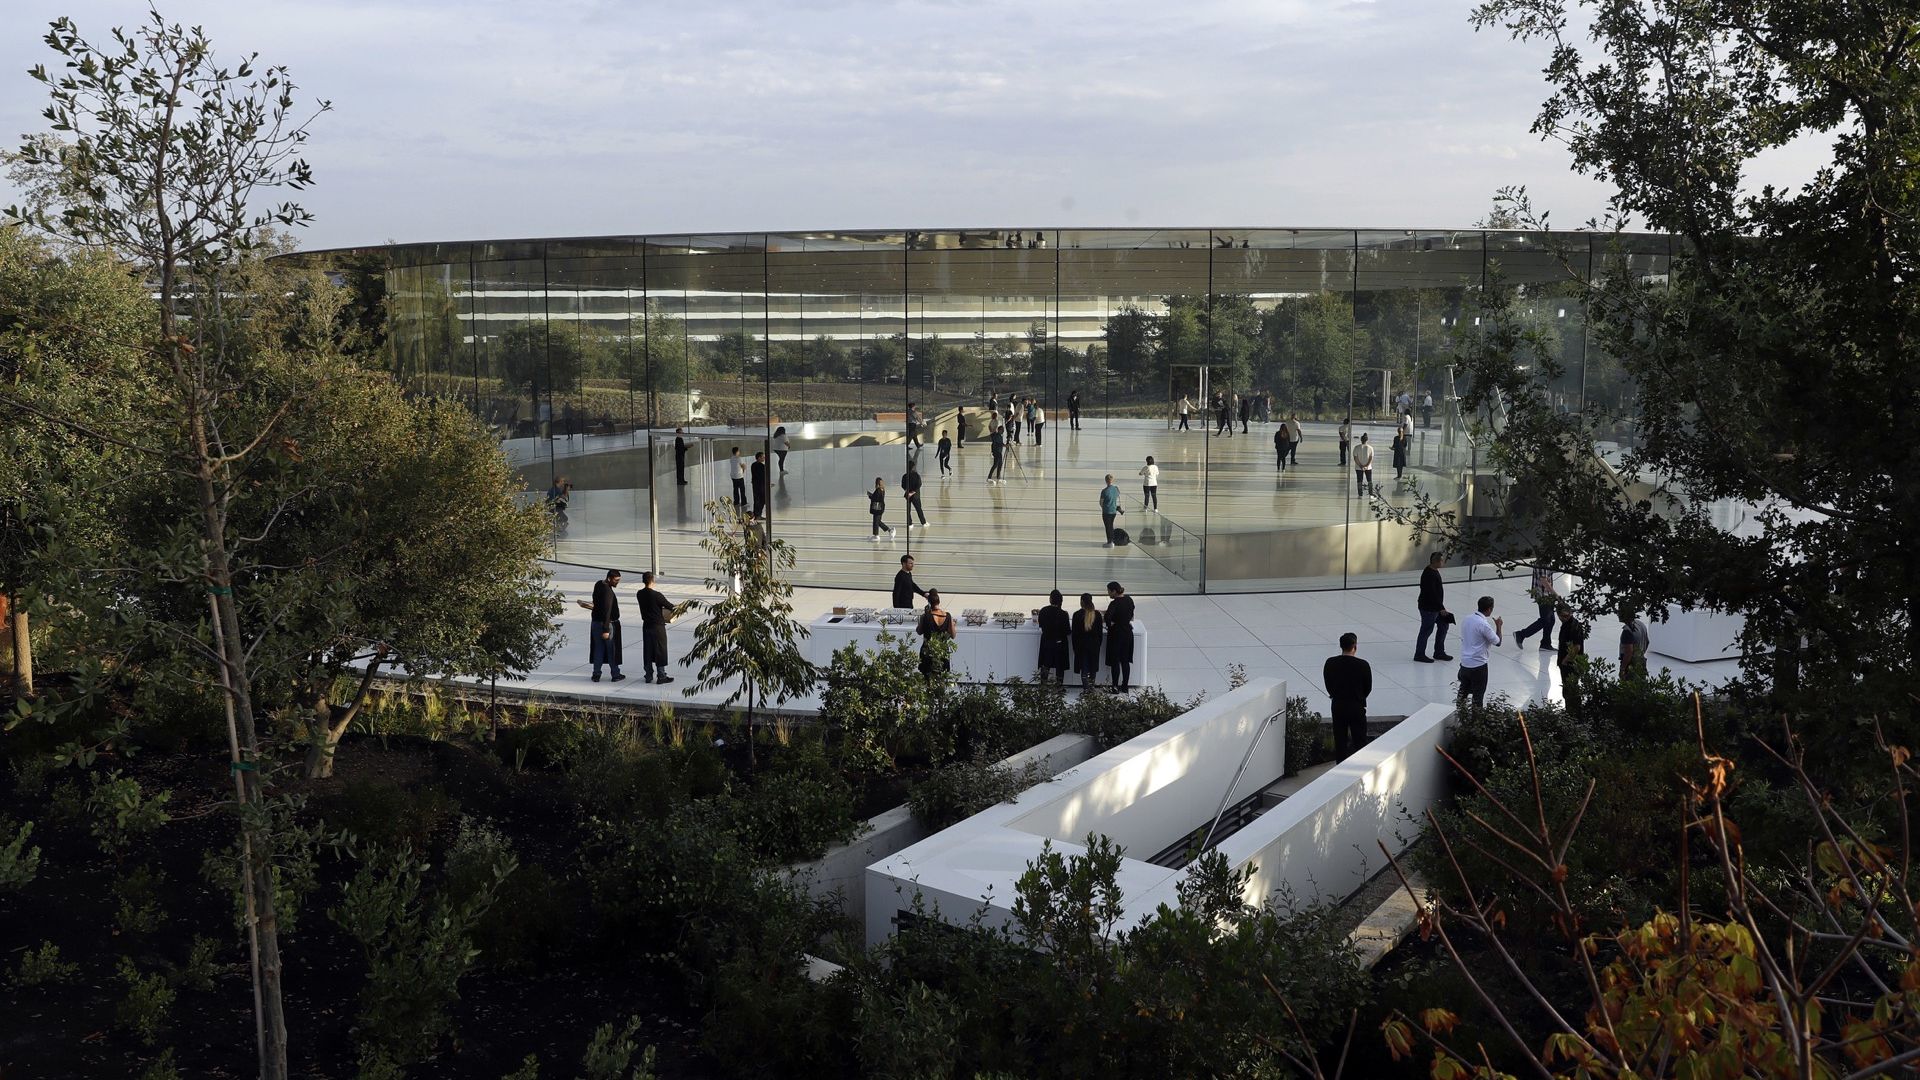 The new Apple campus